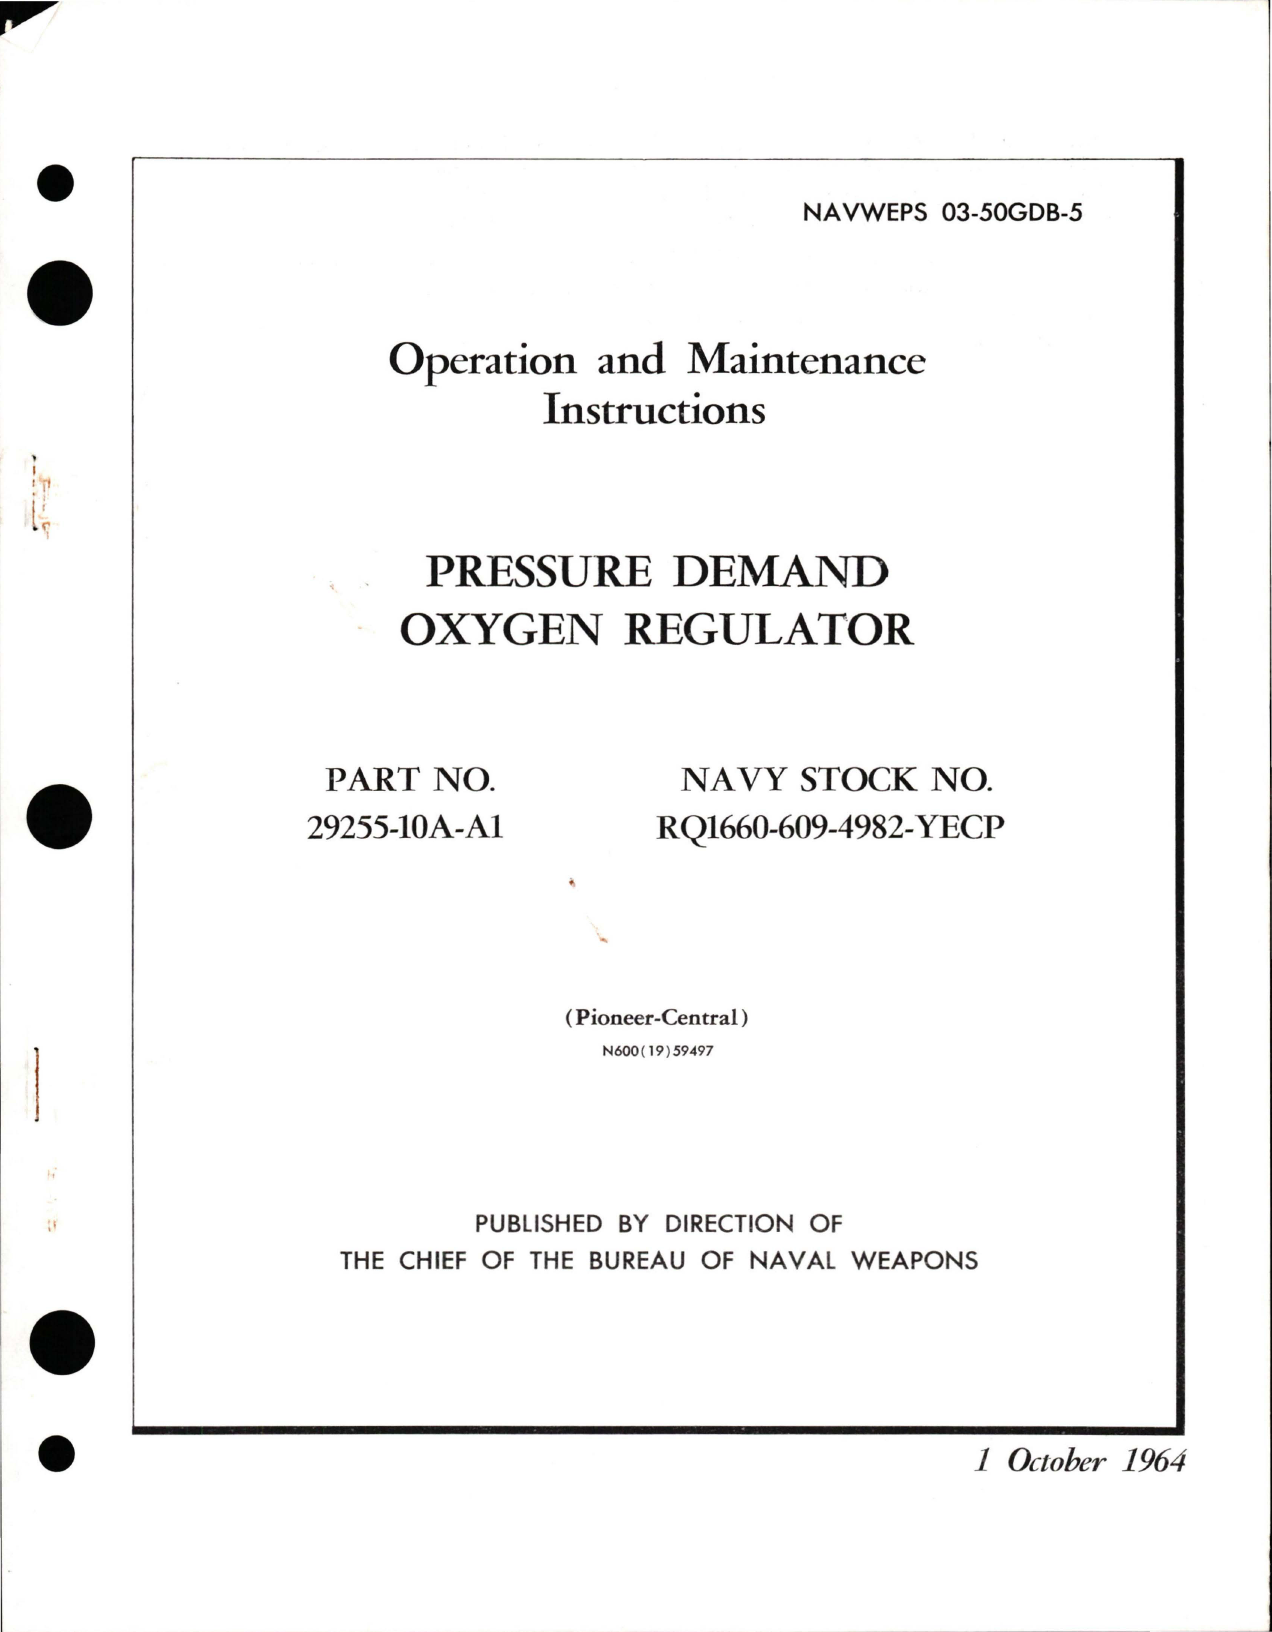 Sample page 1 from AirCorps Library document: Operation and Maintenance Instructions for Pressure Demand Oxygen Regulator - Part 29255-10A-A1